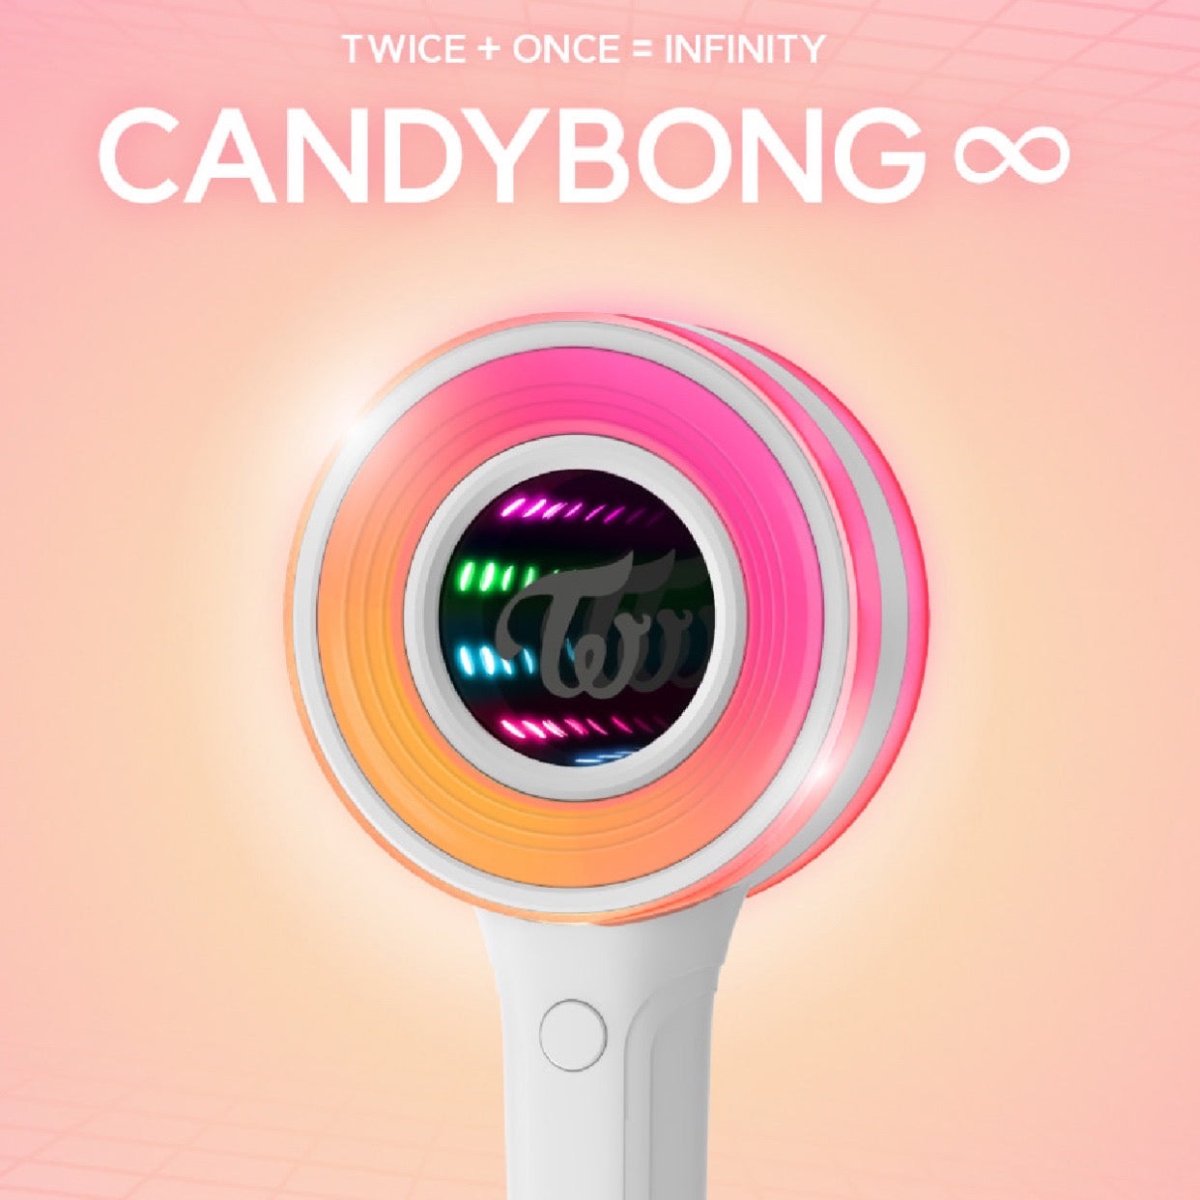 TWICE Official CANDY BONG INFINITY Light Stick Version 3 – K-STAR